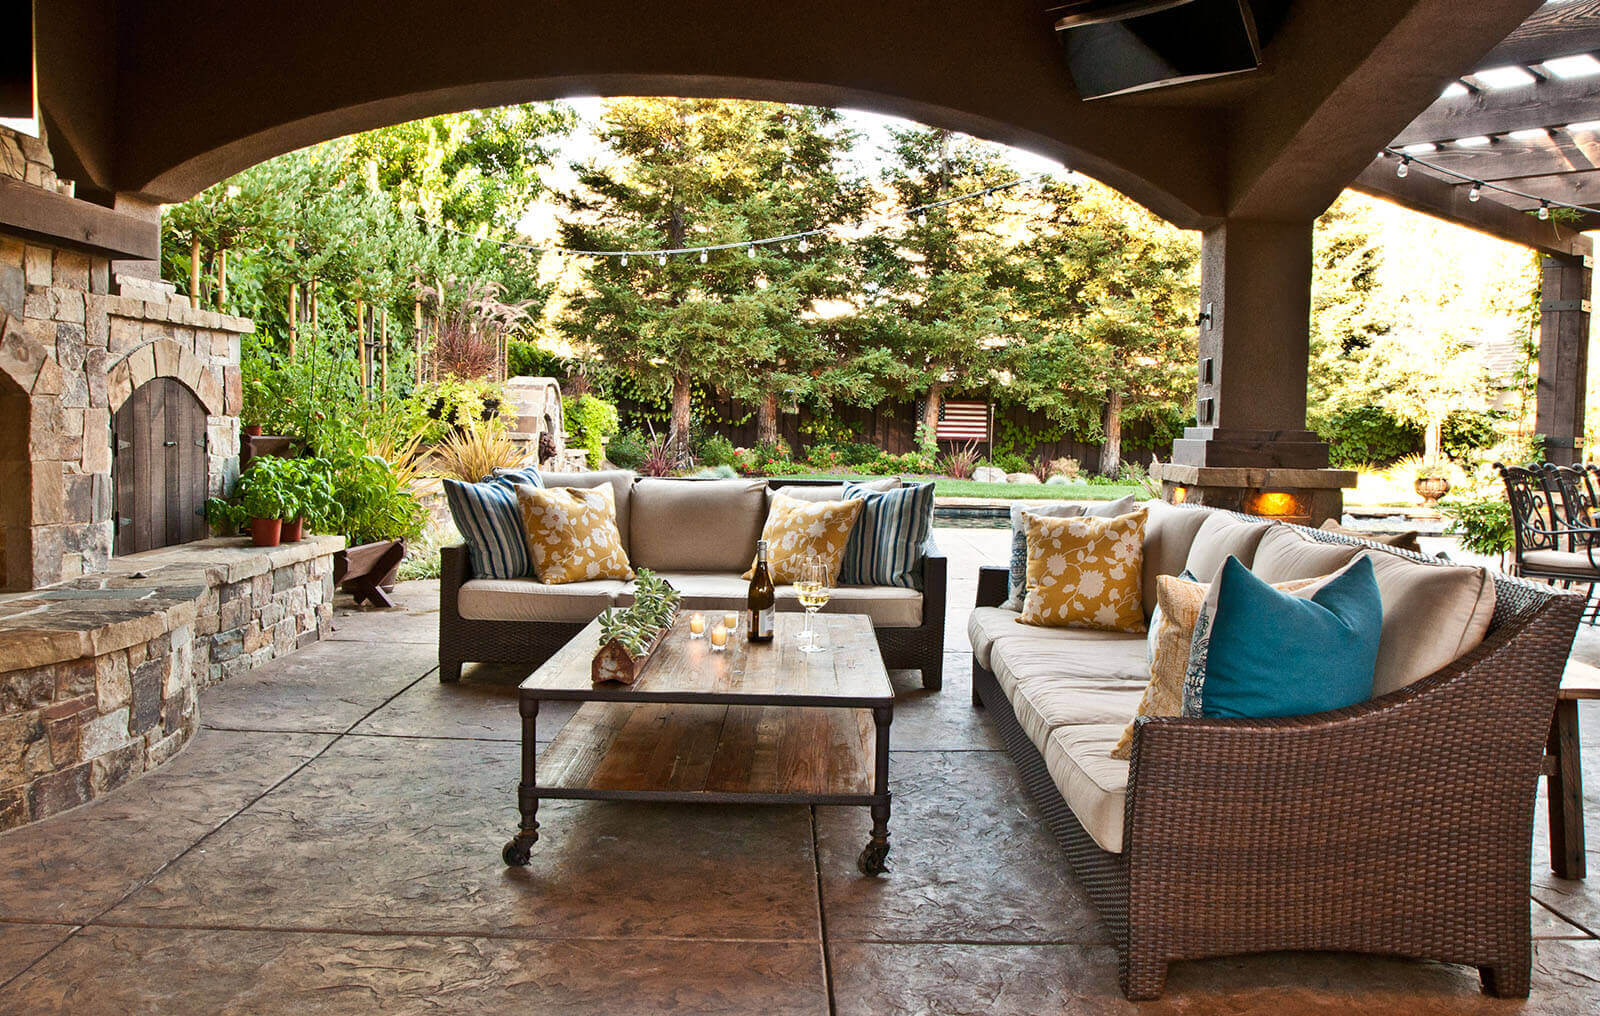 Arched pergola covers an outdoor lounge on rustic tile patio with view of tree-lined landscaped yard